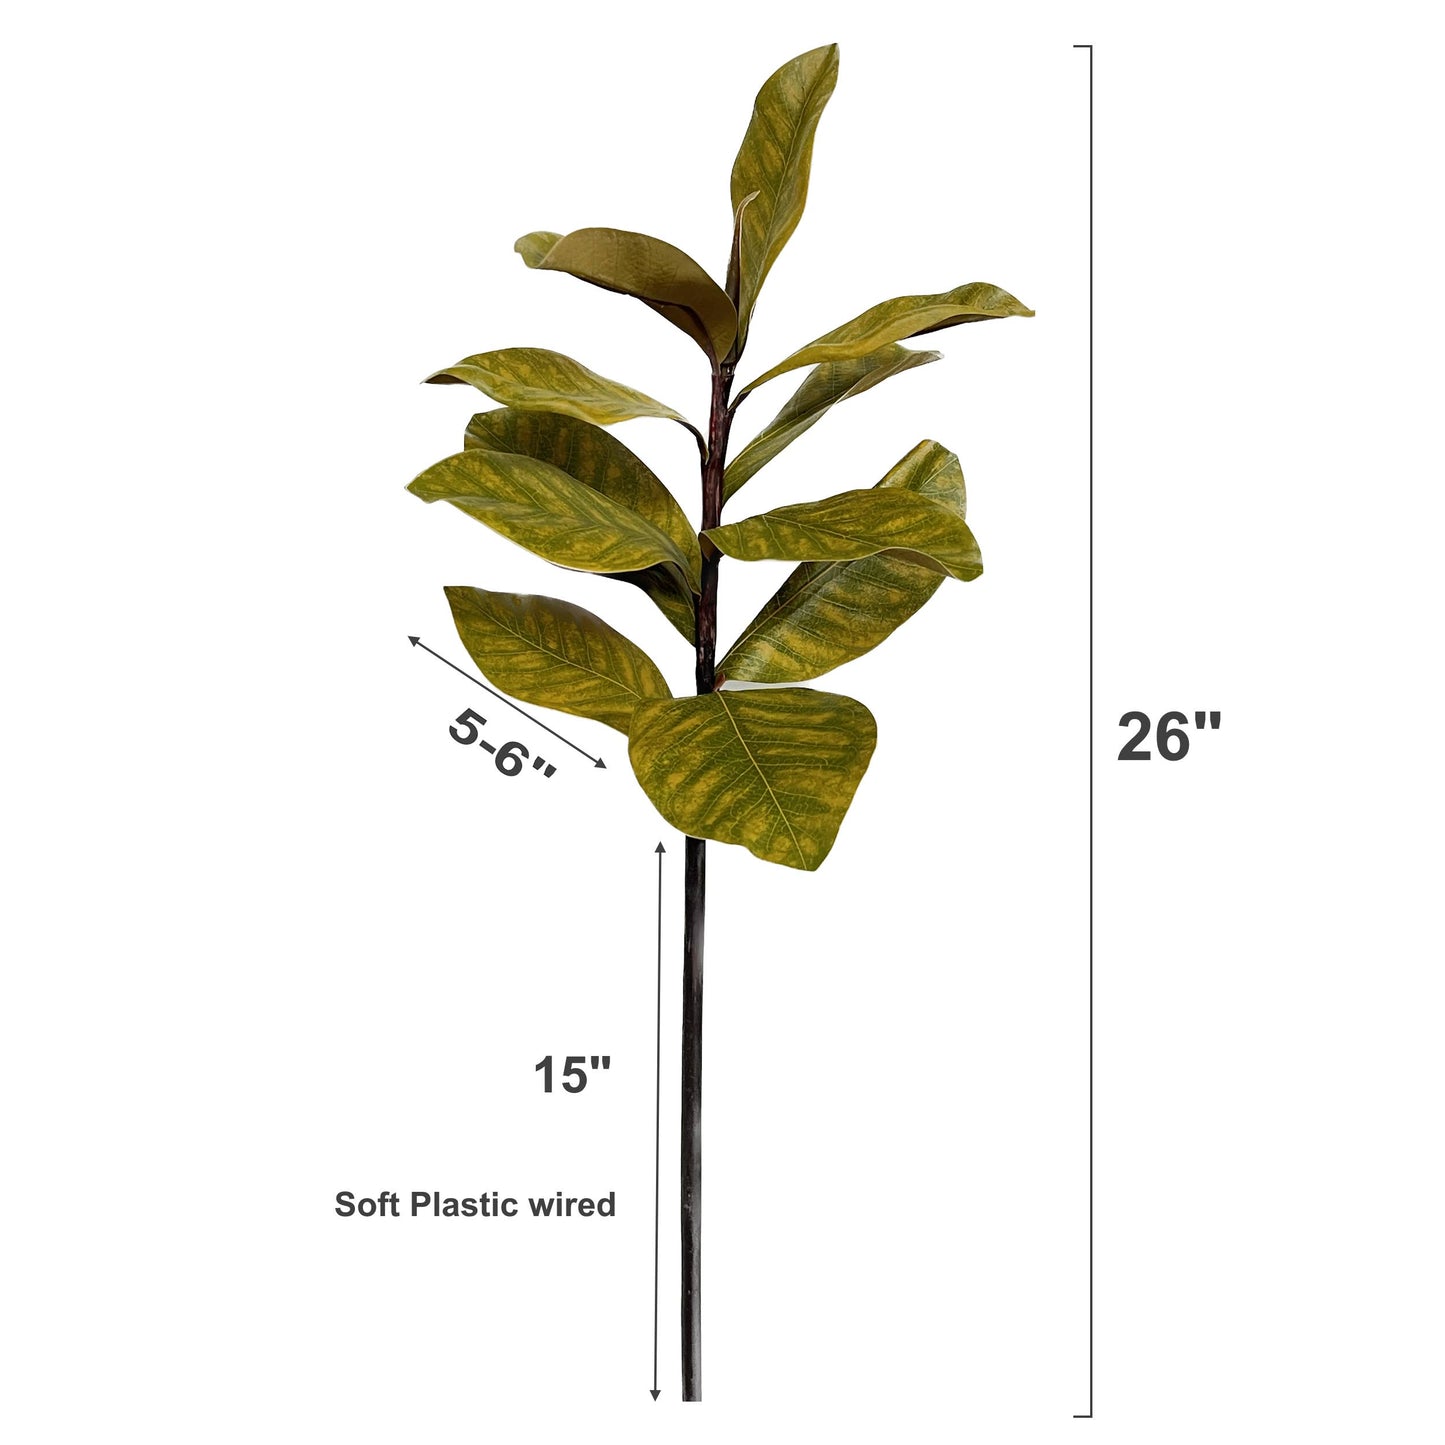 27" Real touch Magnolia Leaf Spray: Natural Green